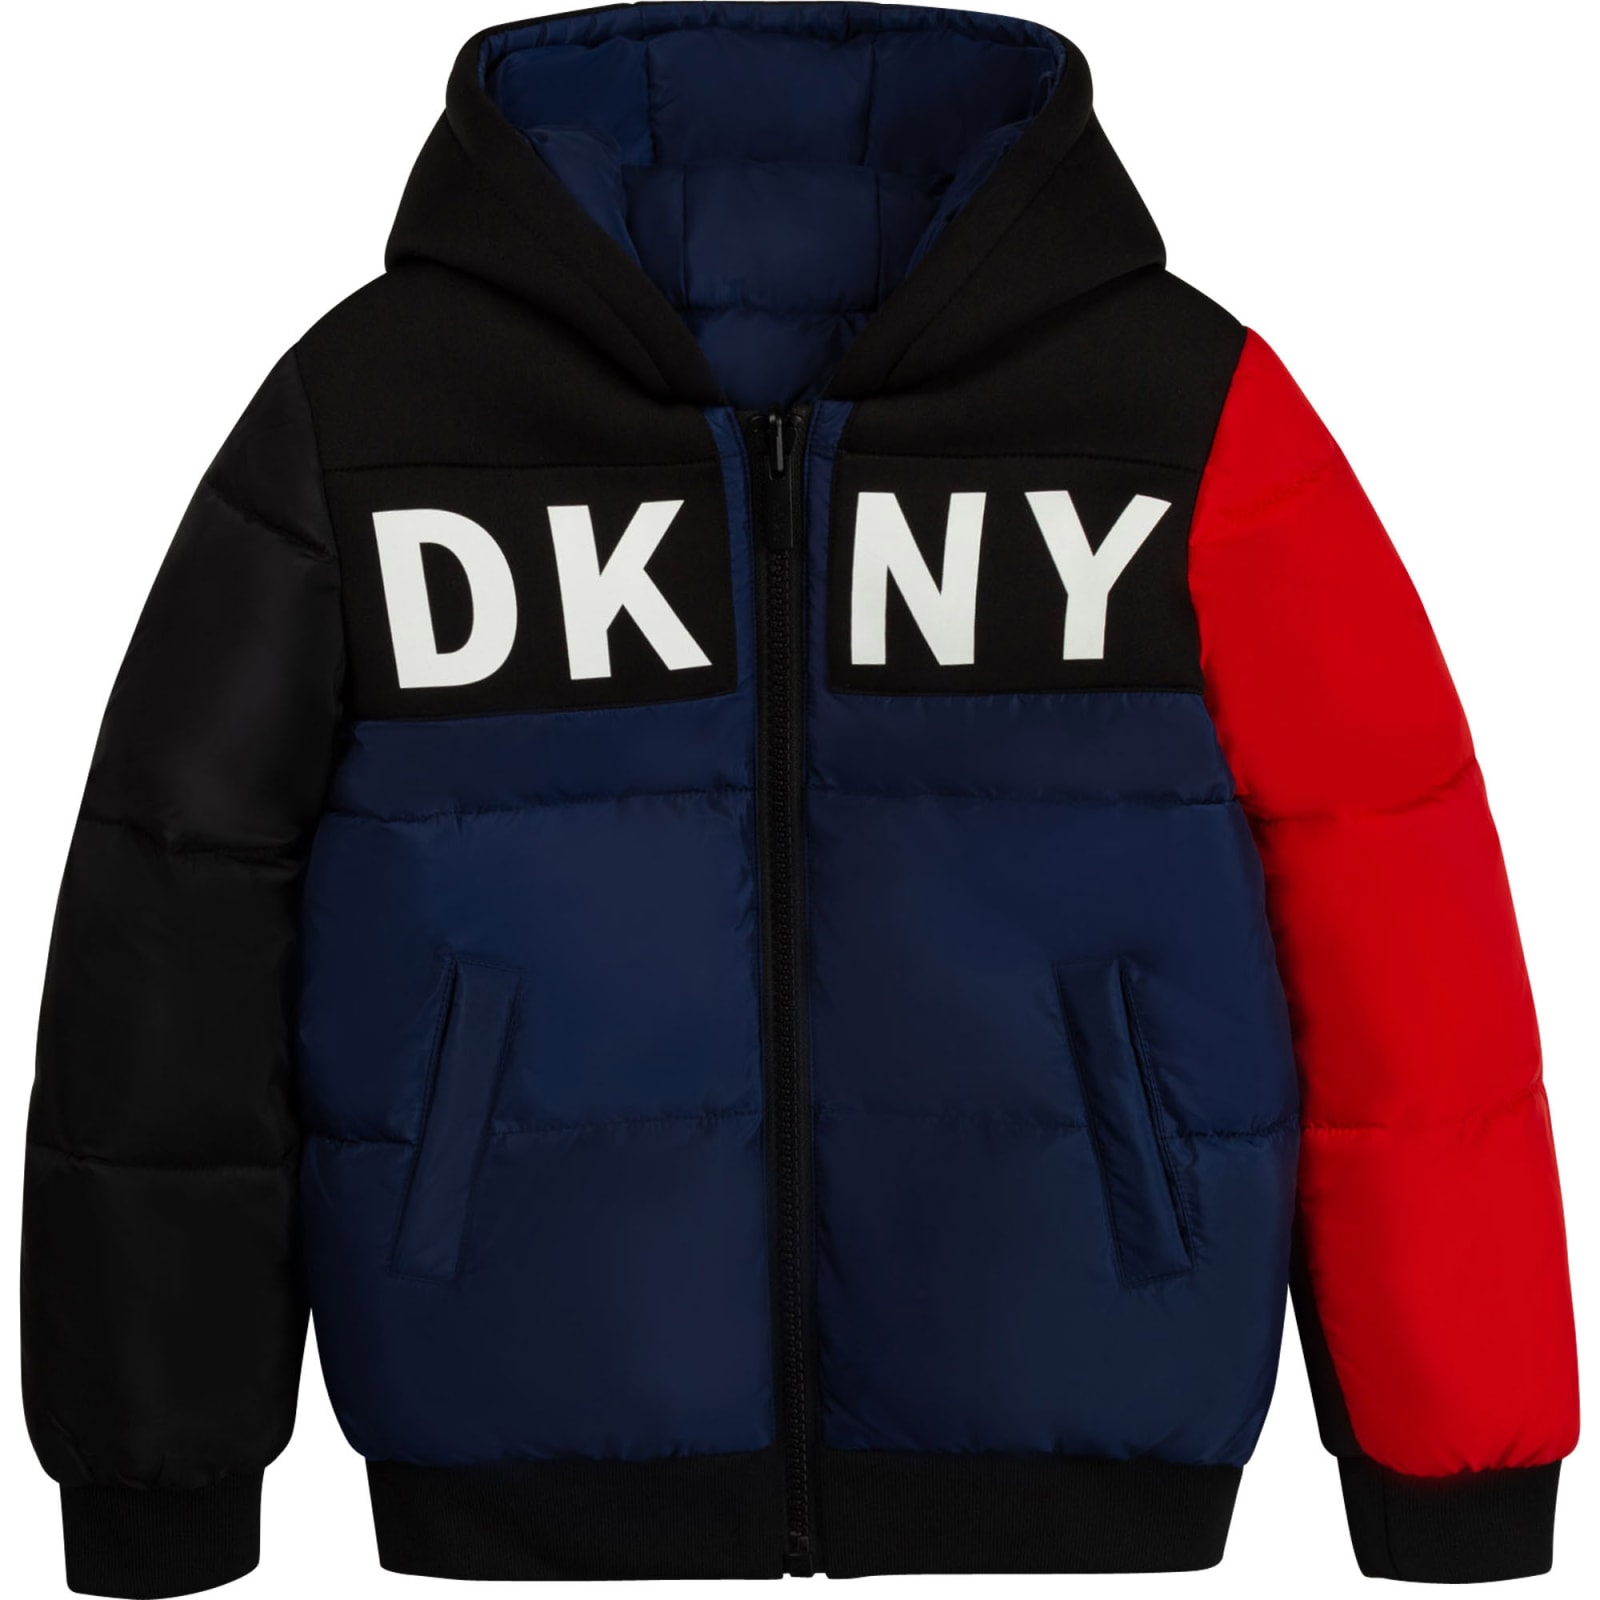 DKNY Bomber Jacket With Color-block Design